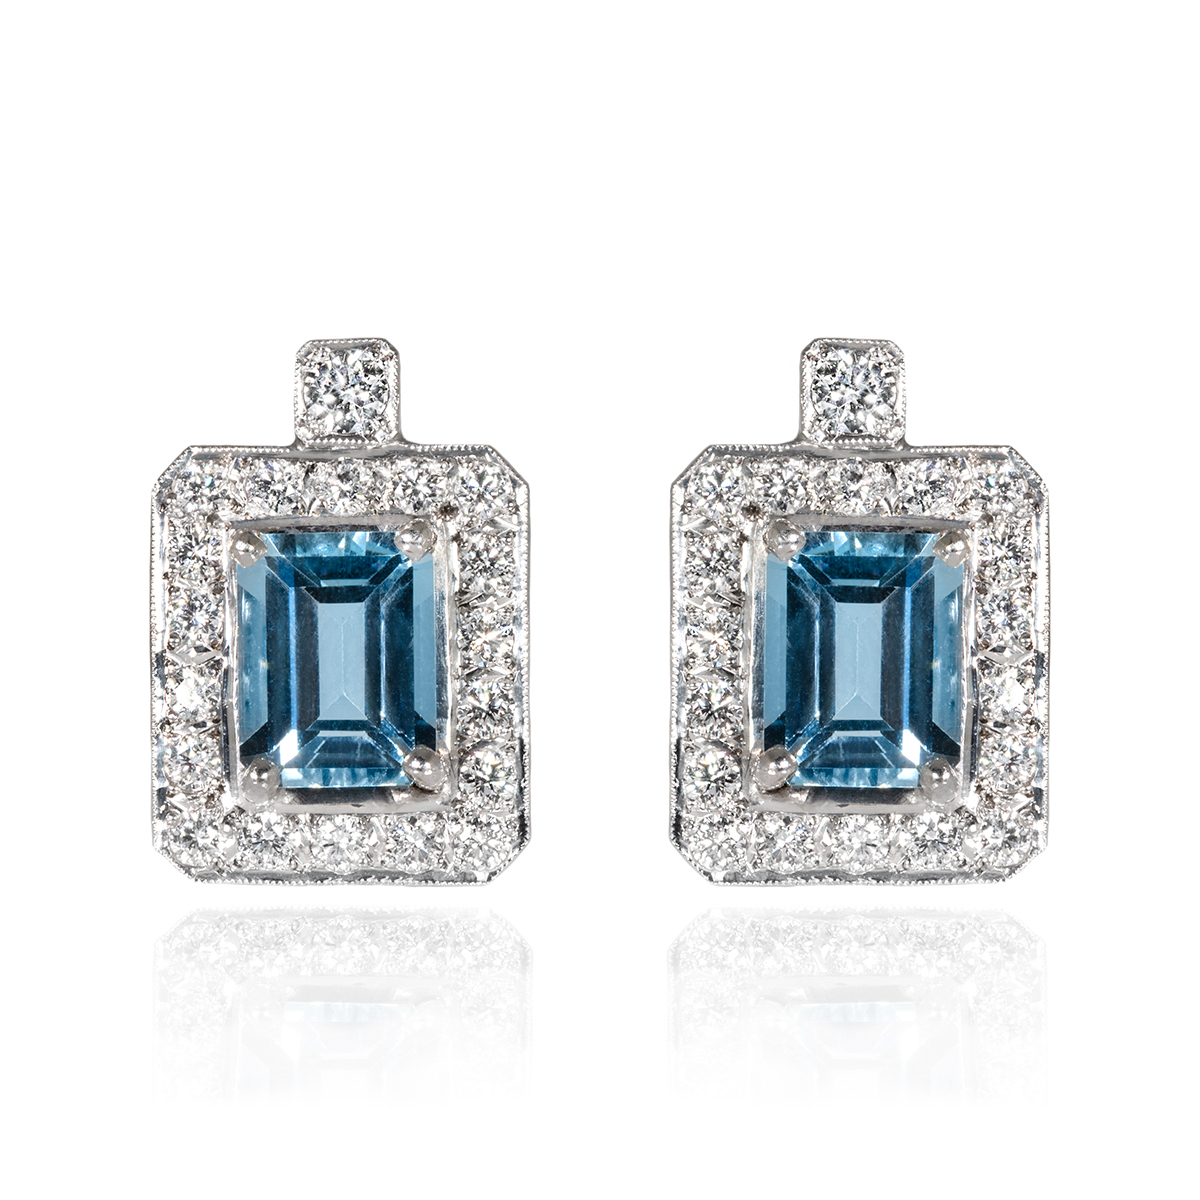 18ct White Gold Art Deco Style Earrings with Two Emerald Cut Fine Blue ...